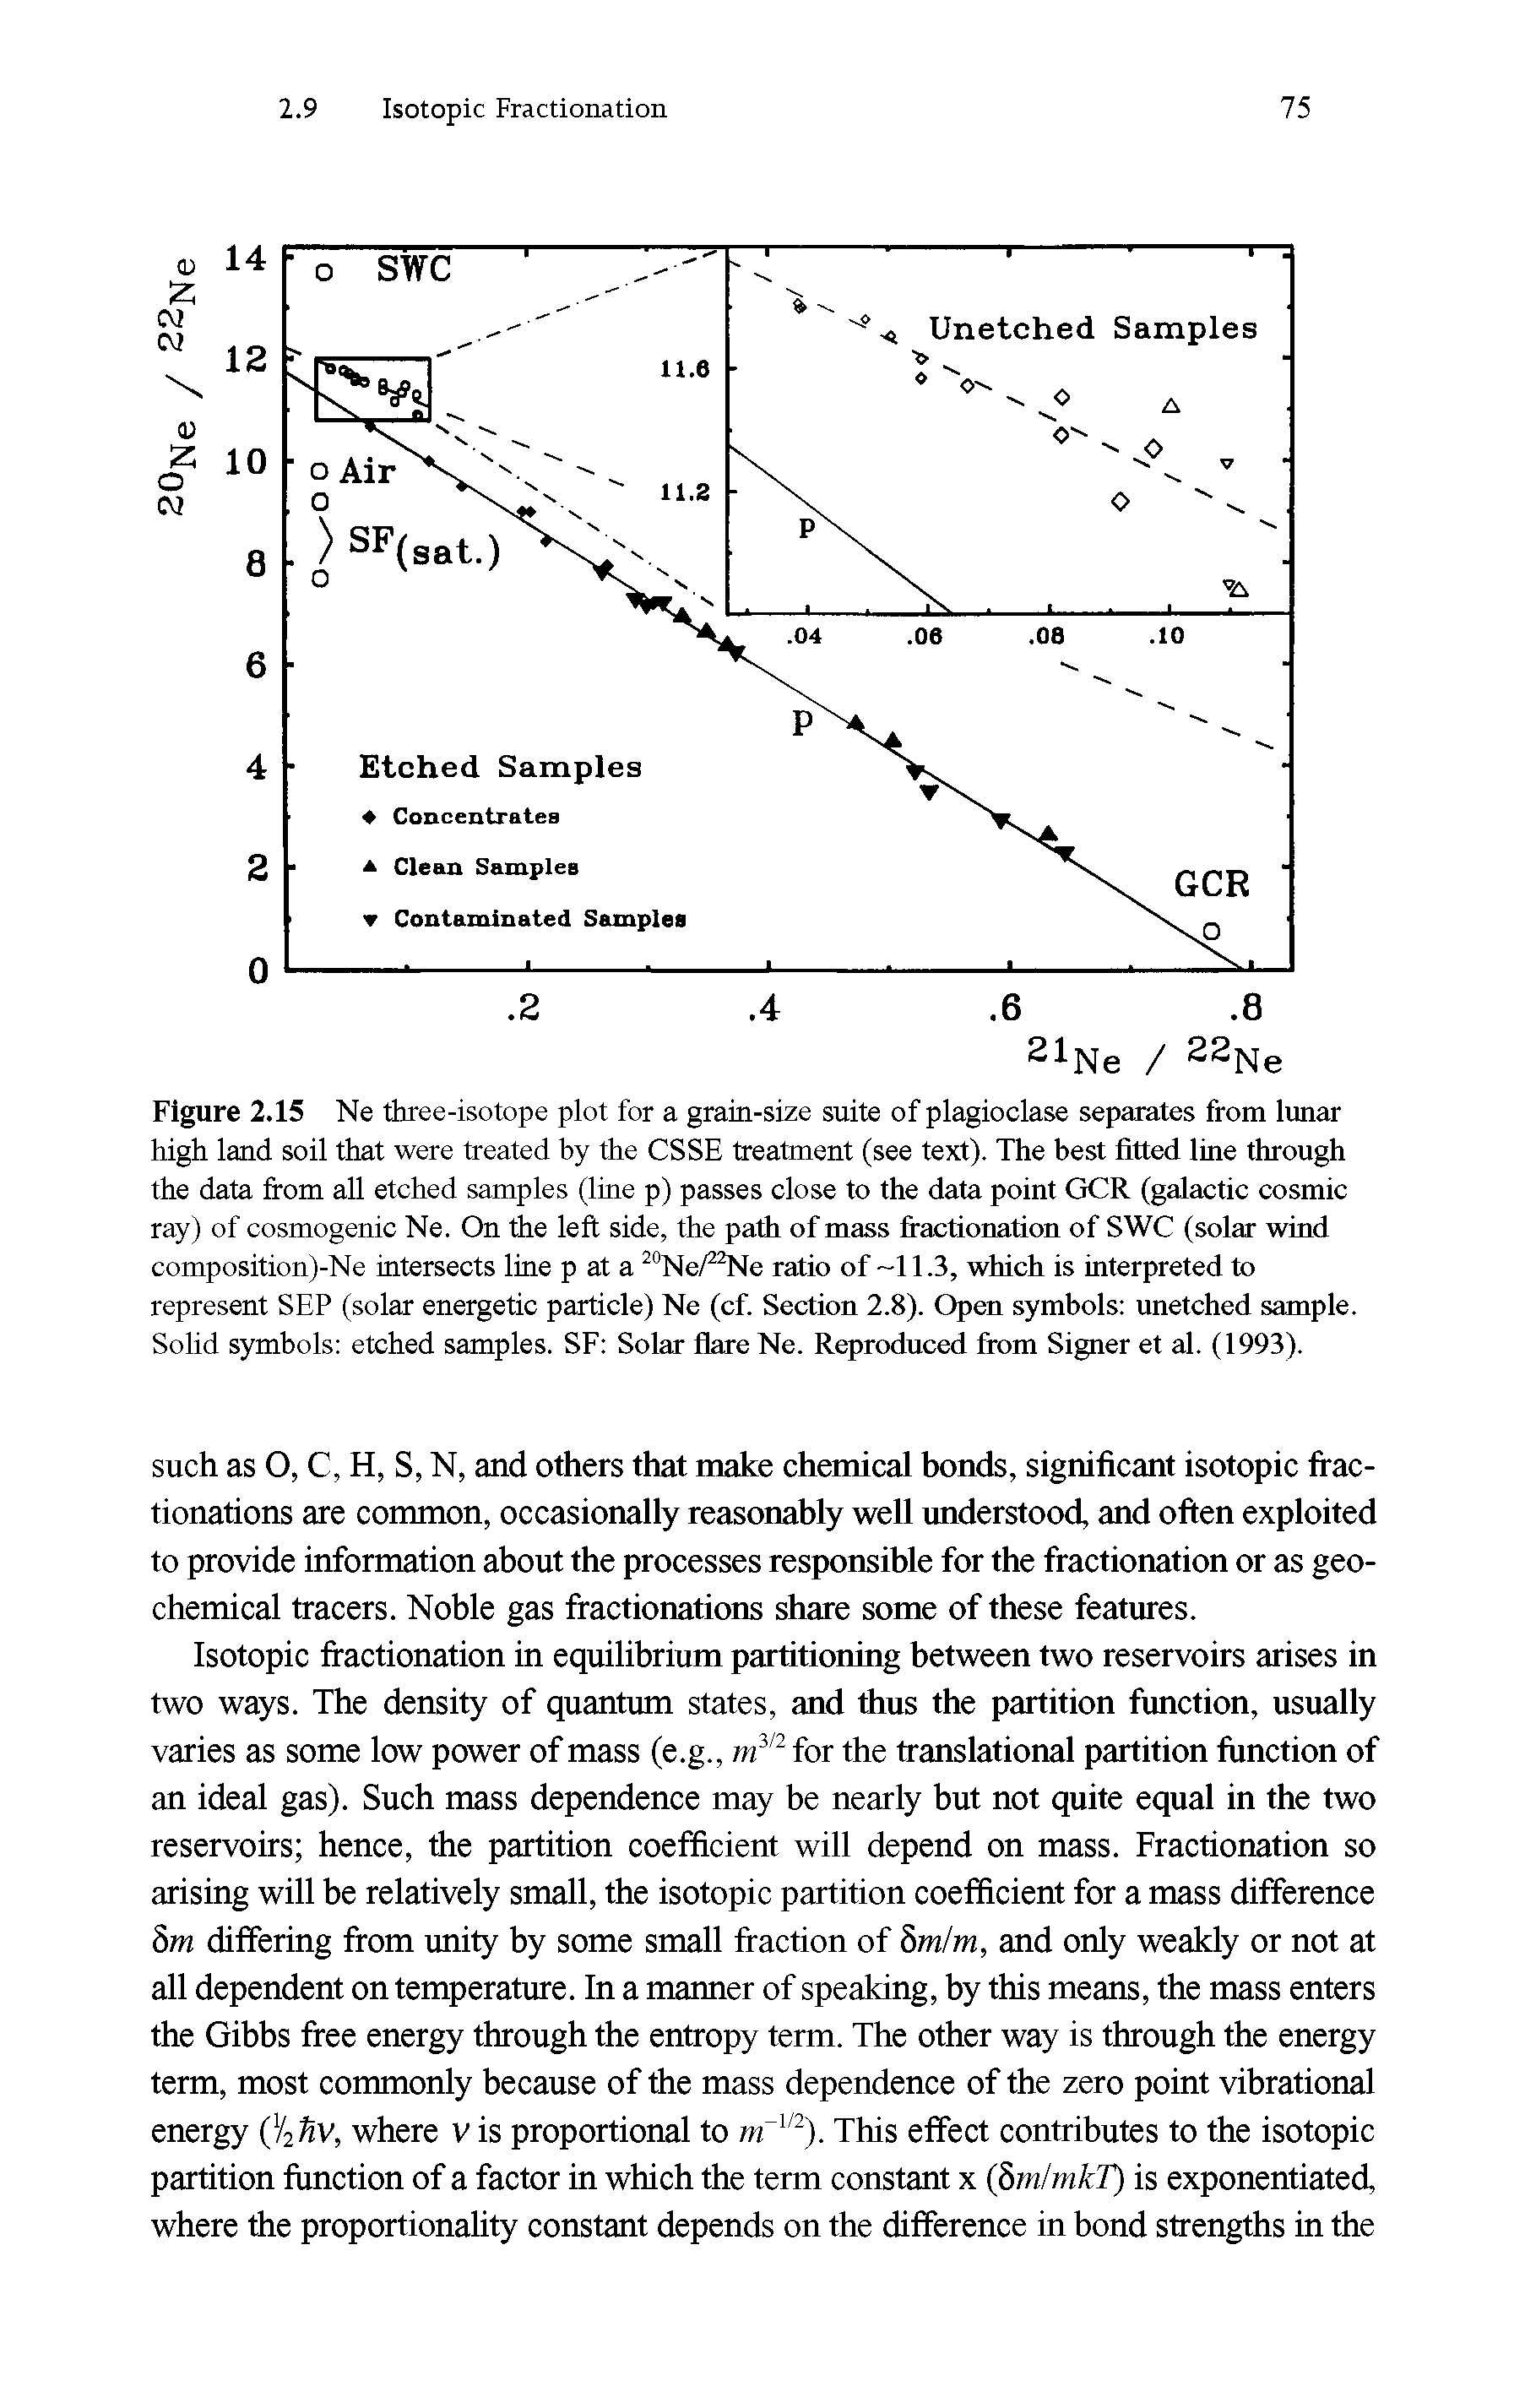 Figure 2.15 Ne three-isotope plot for a grain-size suite of plagioclase separates from lunar high land soil that were treated by the CSSE treatment (see text). The best fitted line through the data from all etched samples (line p) passes close to the data point GCR (galactic cosmic ray) of cosmogenic Ne. On the left side, the path of mass fractionation of SWC (solar wind composition)-Ne intersects line p at a 20Ne/22Ne ratio of -11.3, which is interpreted to represent SEP (solar energetic particle) Ne (cf. Section 2.8). Open symbols unetched sample. Solid symbols etched samples. SF Solar flare Ne. Reproduced from Signer et al. (1993).